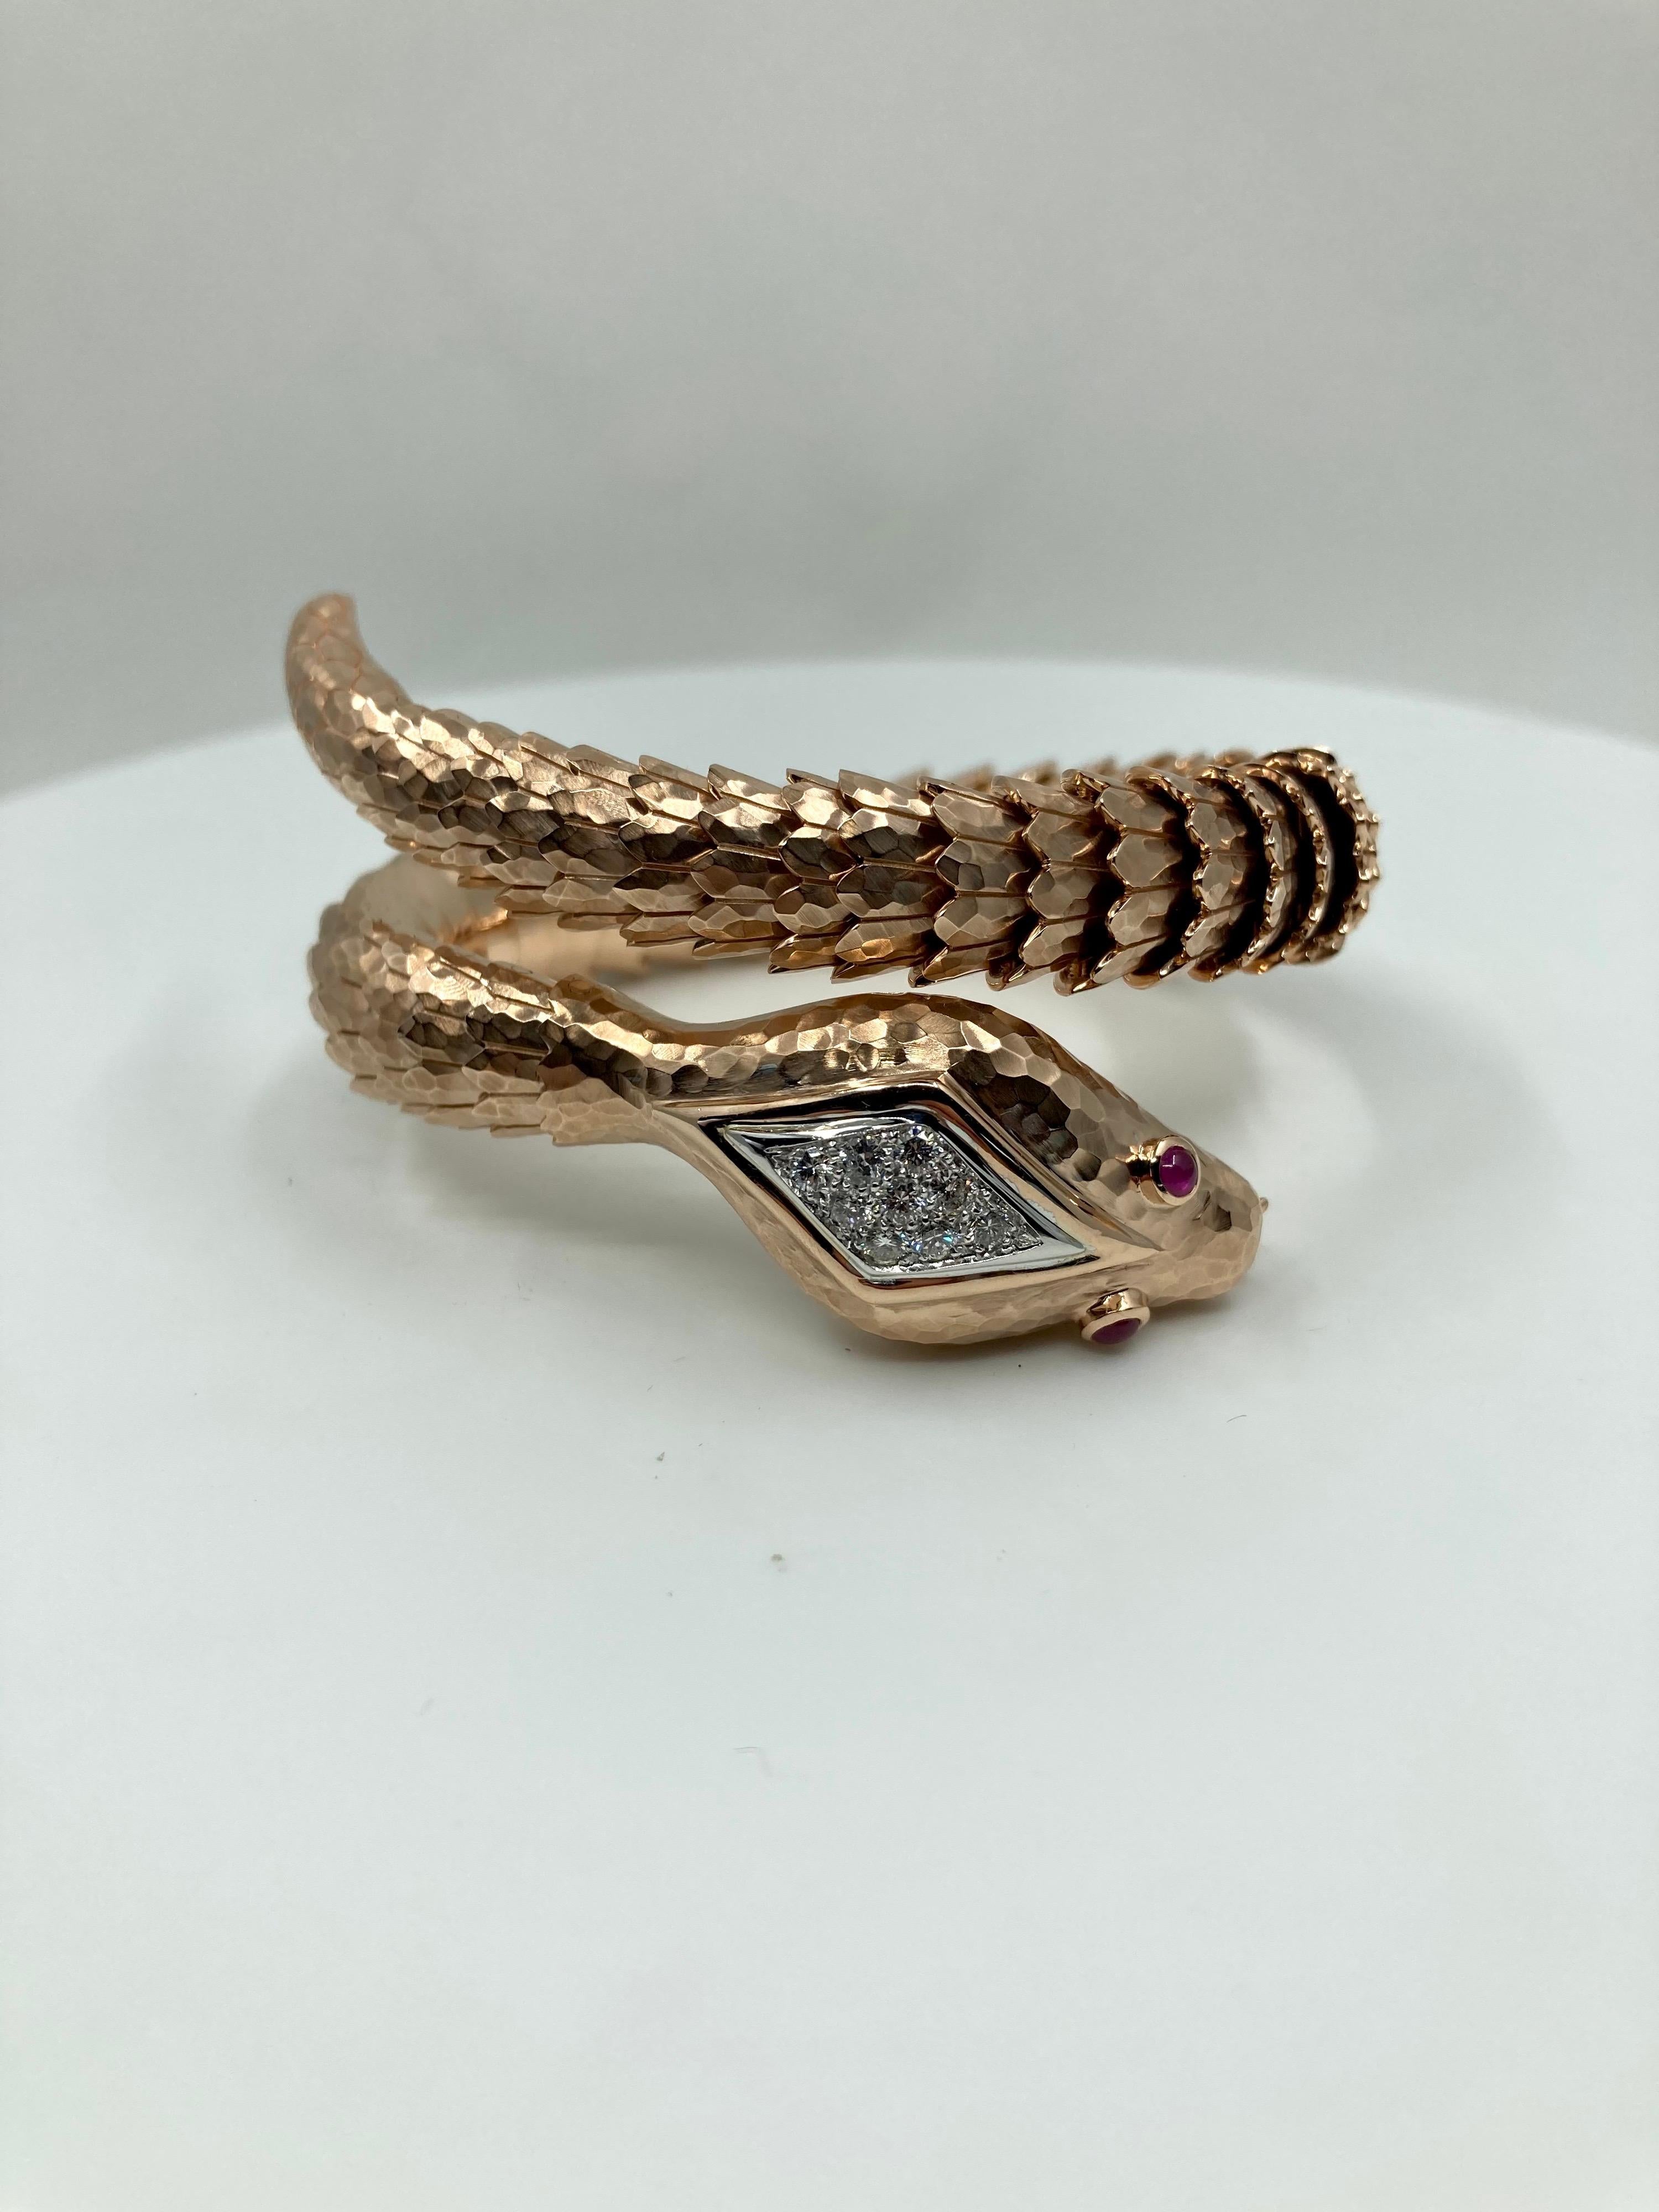 Timeless Rose Gold Bracelet, with Diamonds ct. 0.55 and Rubies ct. 0.20, handmade in Italy by Roberto Casarin.

A timeless fine handmade creation with an exotic subject. This snake bracelet is an authentic example of true Italian craftamnship and